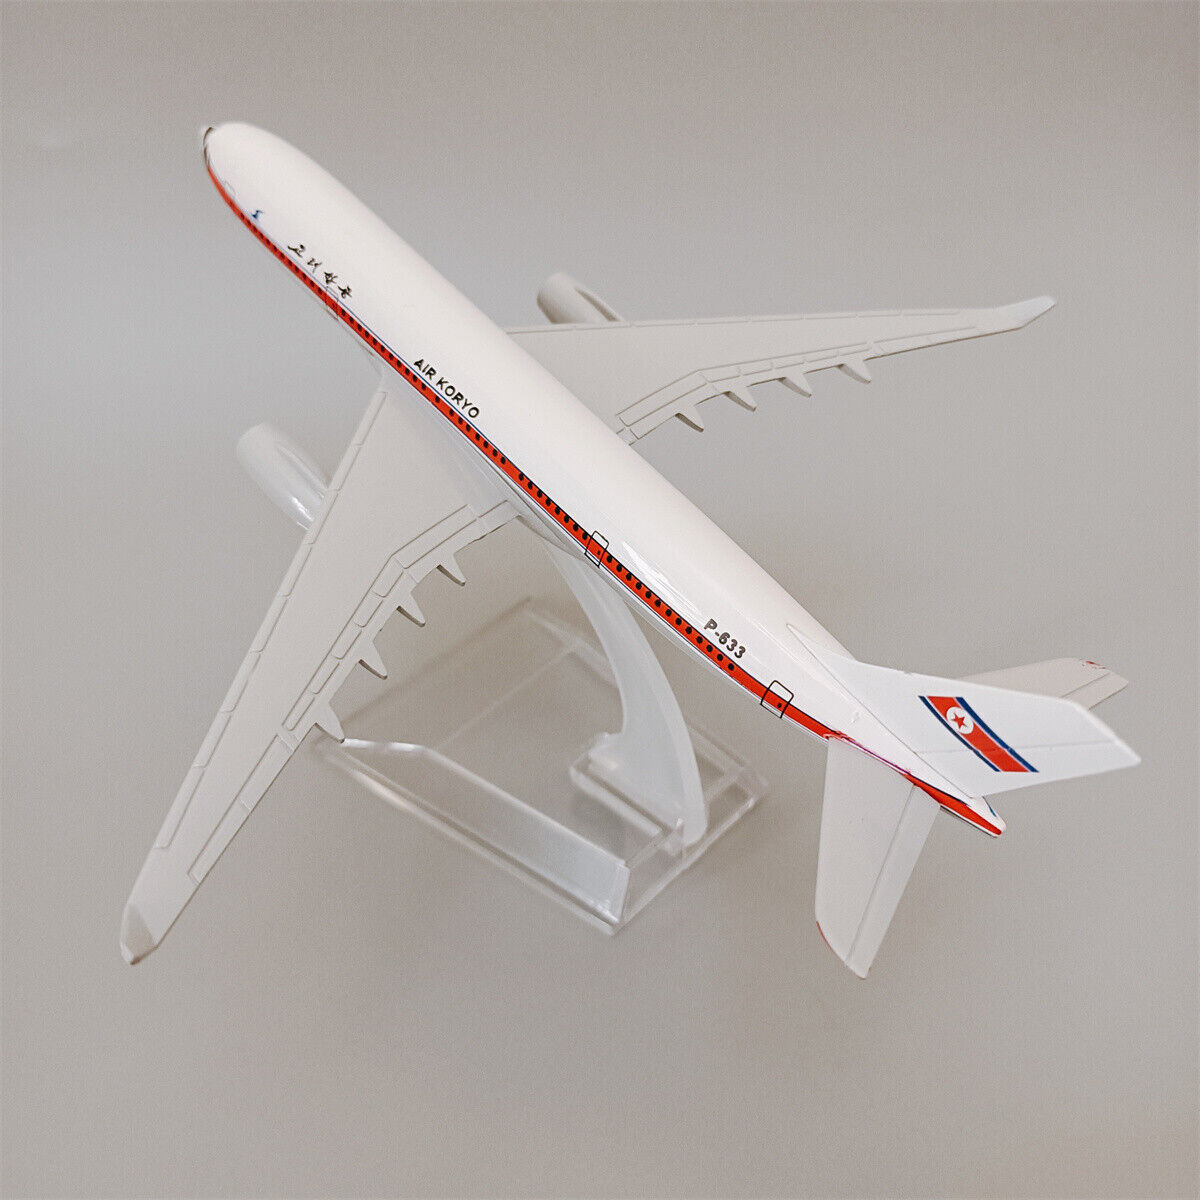 Air KORYO Airbus A330 Airlines airplane Model Plane Alloy Metal Aircraft 16cm